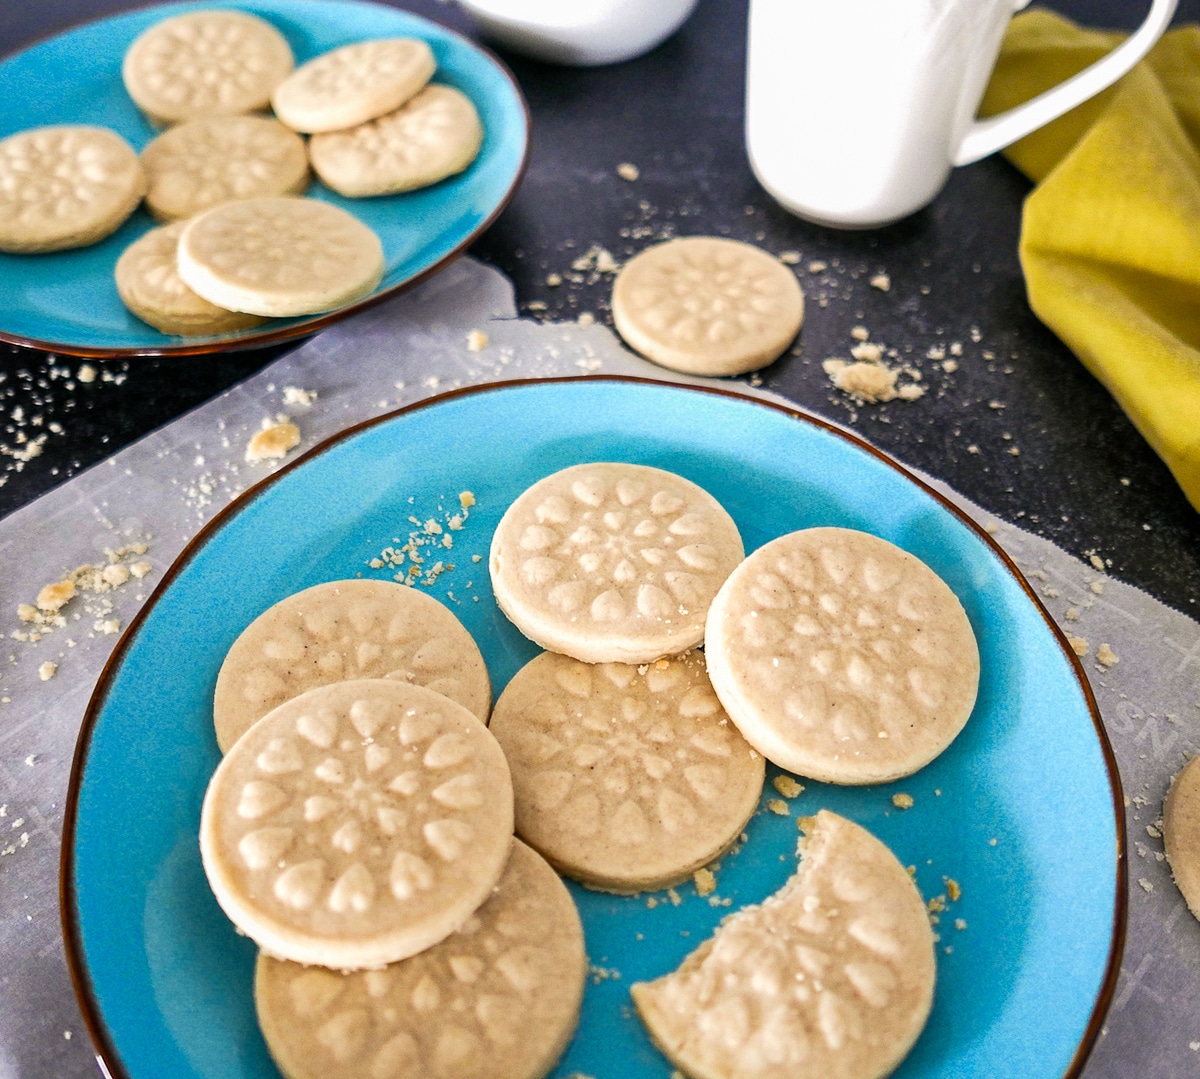 cardamom shortbread cookies arranged on two blue plates with parchment and crumbs scattered around.